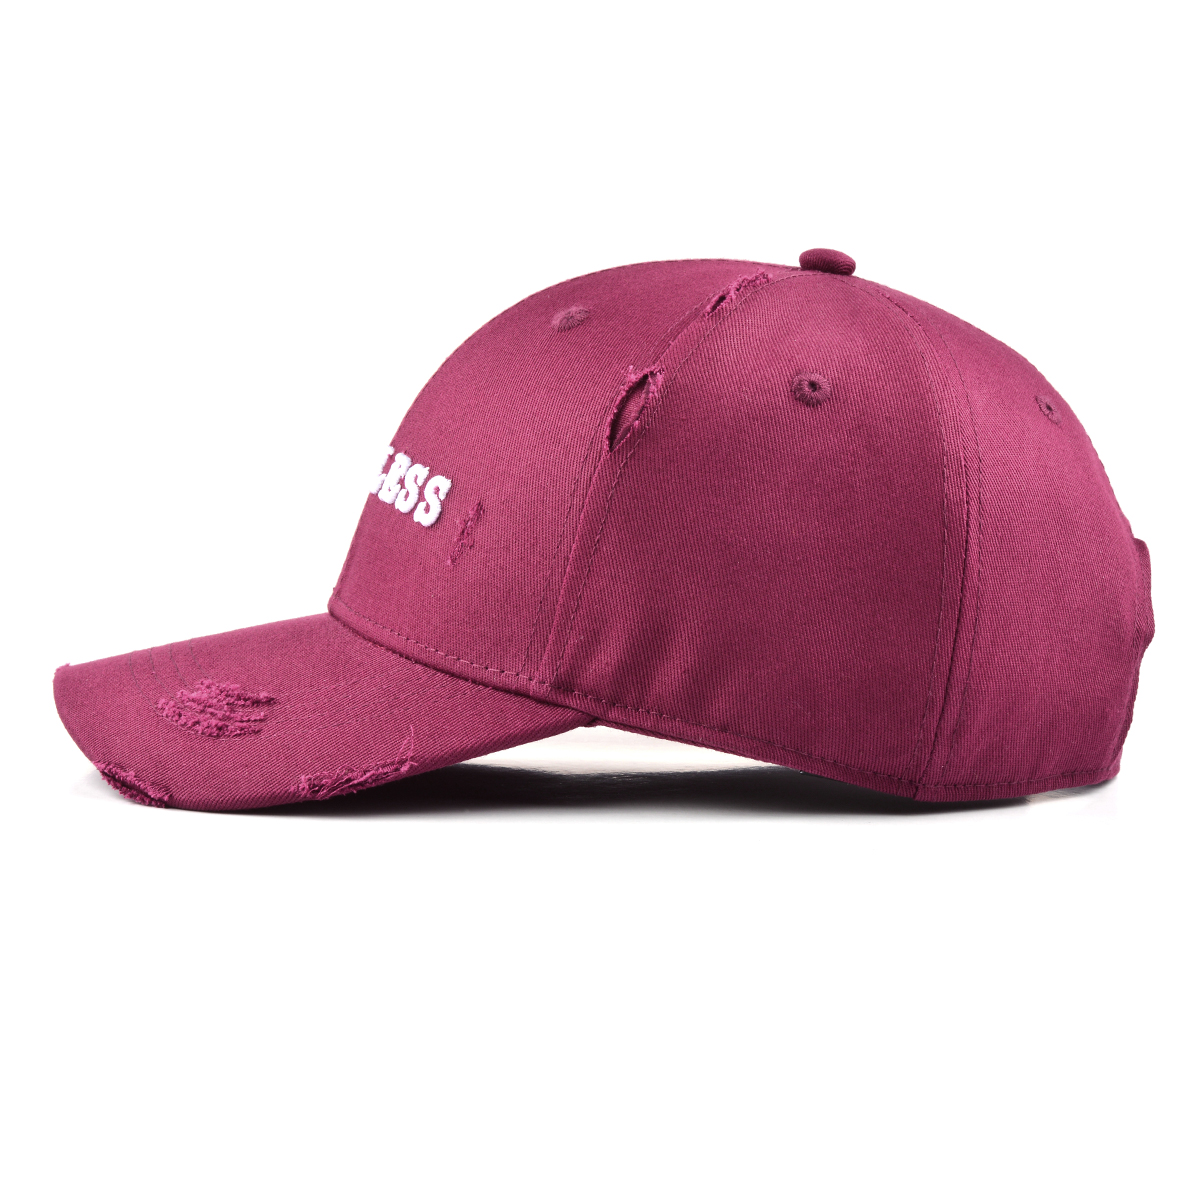 BASEBALL CAP BURGUNDY - HOMELESS Official Site | Be Exclusive with HOMELESS